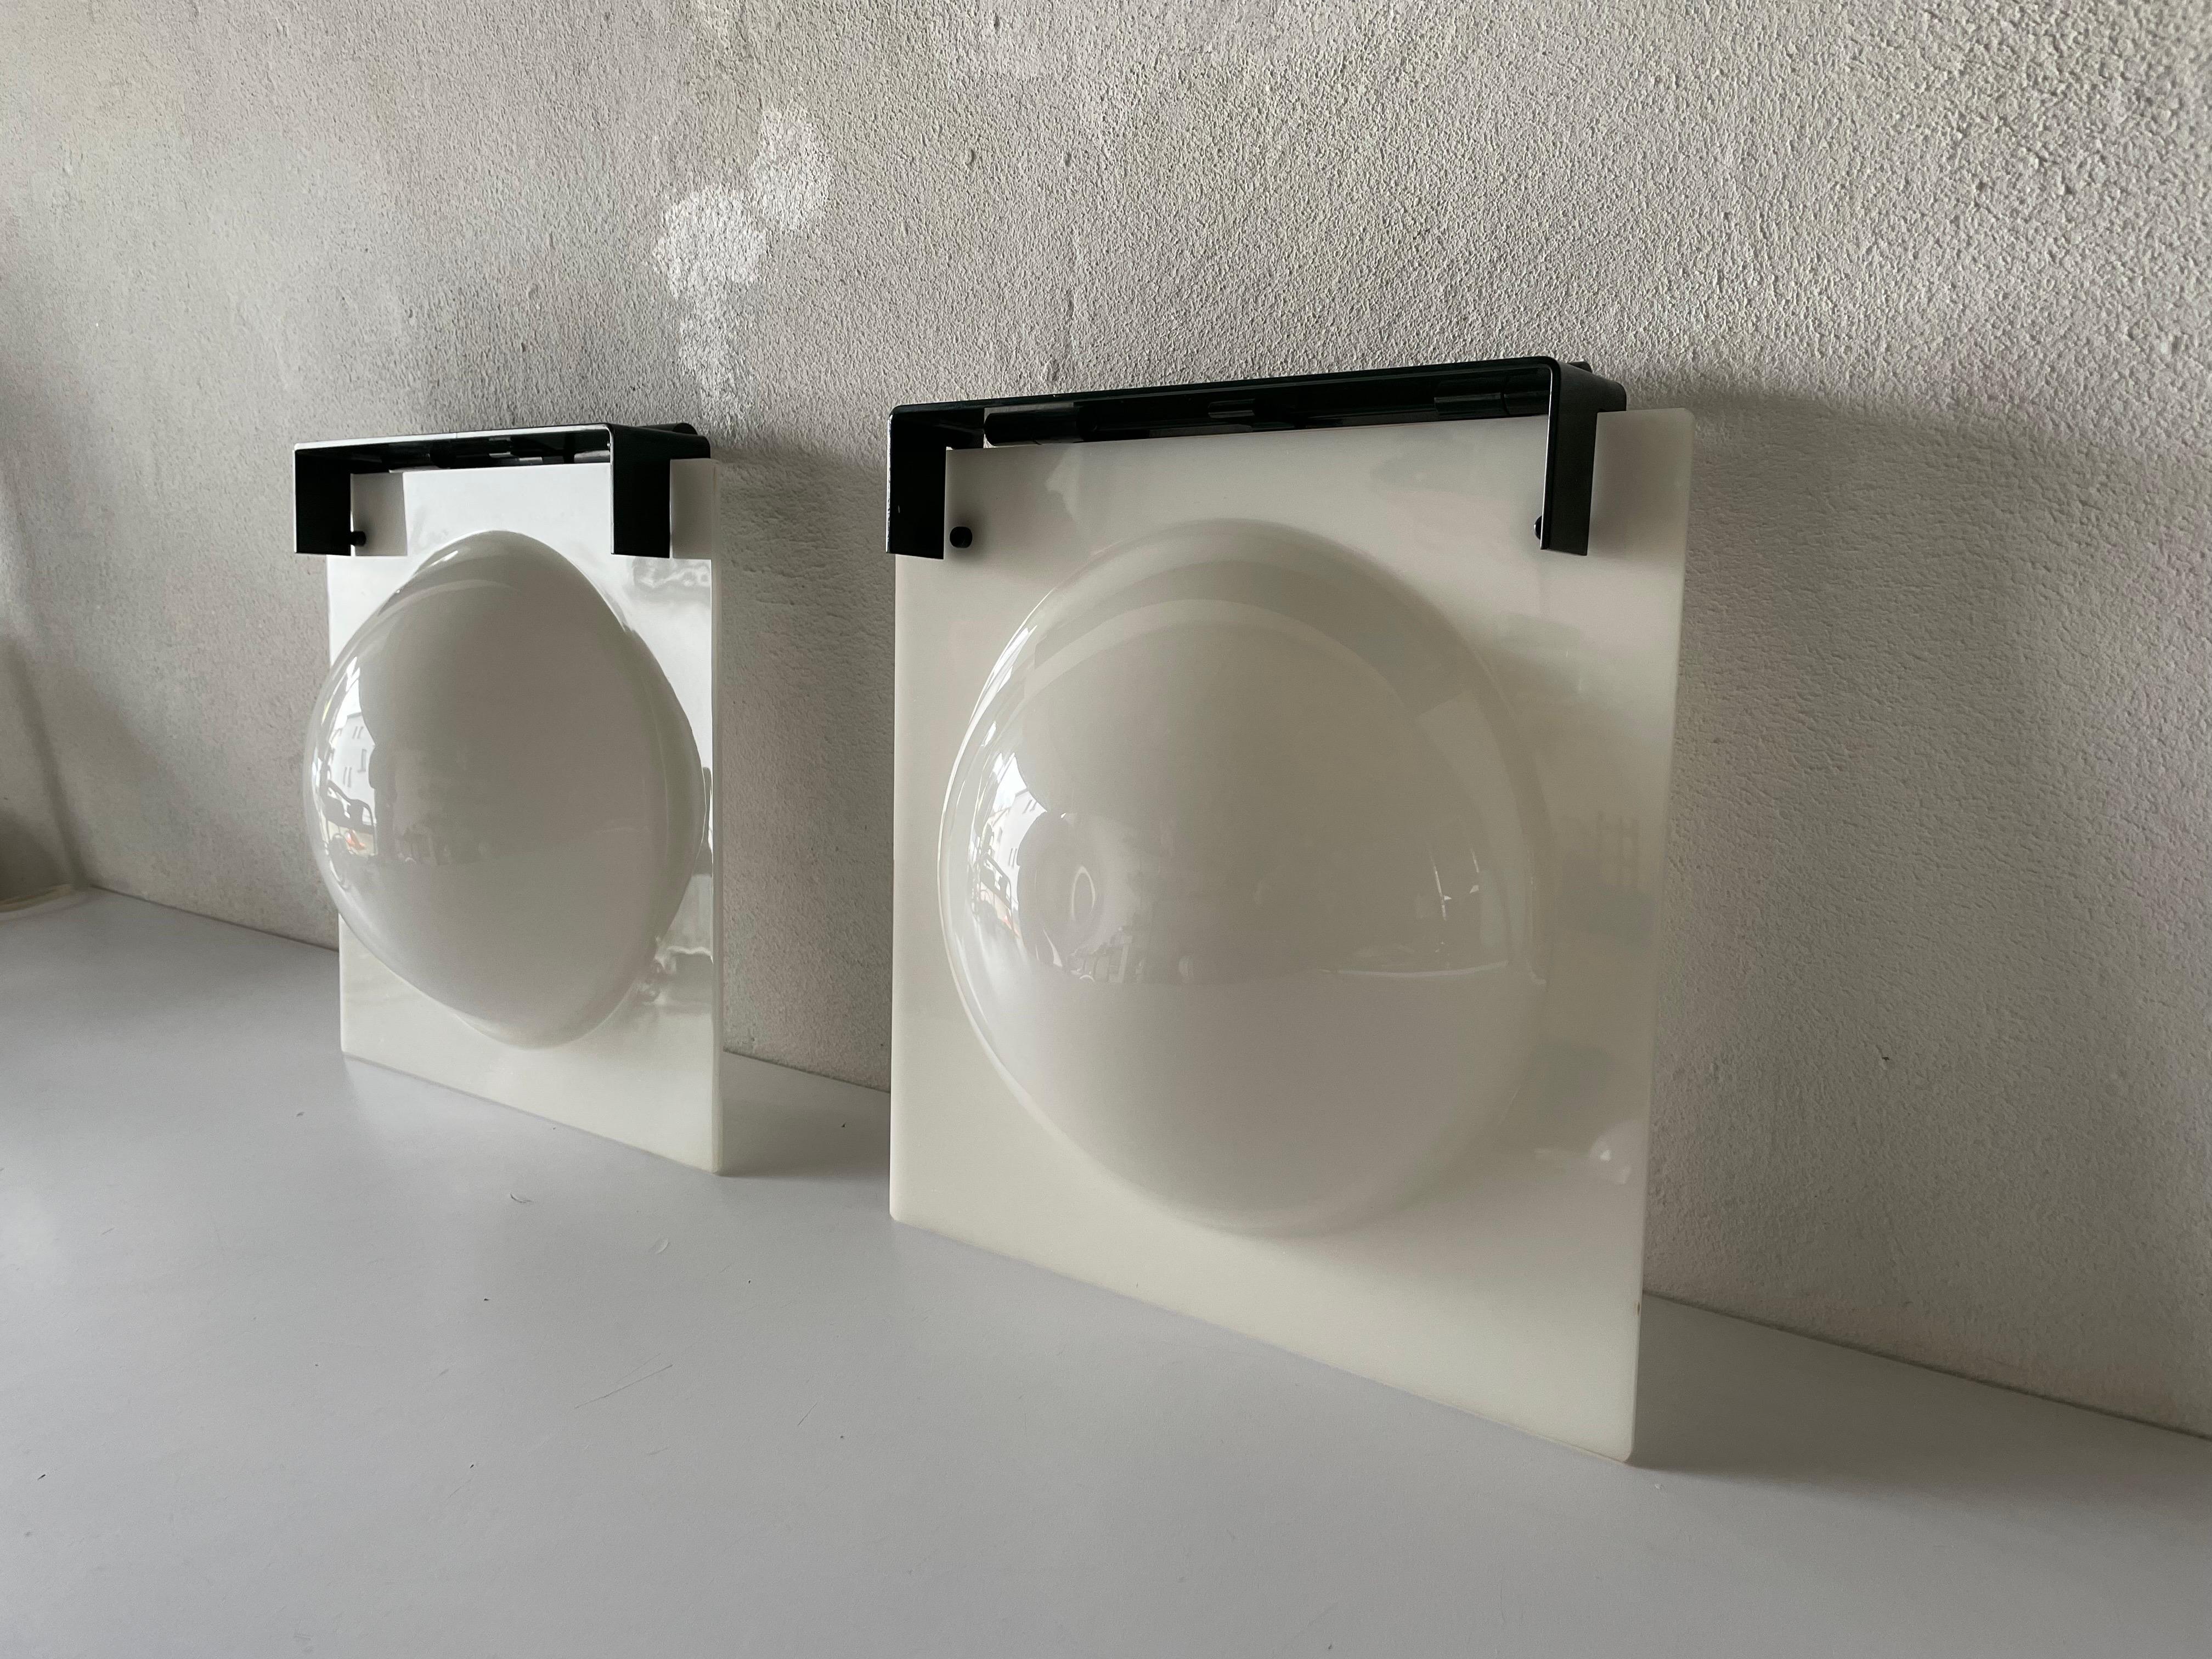 High Quality Plexiglass Bubble Design Pair of Wall Lamps, 1960s, Italy

Very nice high quality wall lamps.

Lamps are in very good vintage condition.

These lamps works with E14 standard light bulbs. 
Wired and suitable to use in all countries.